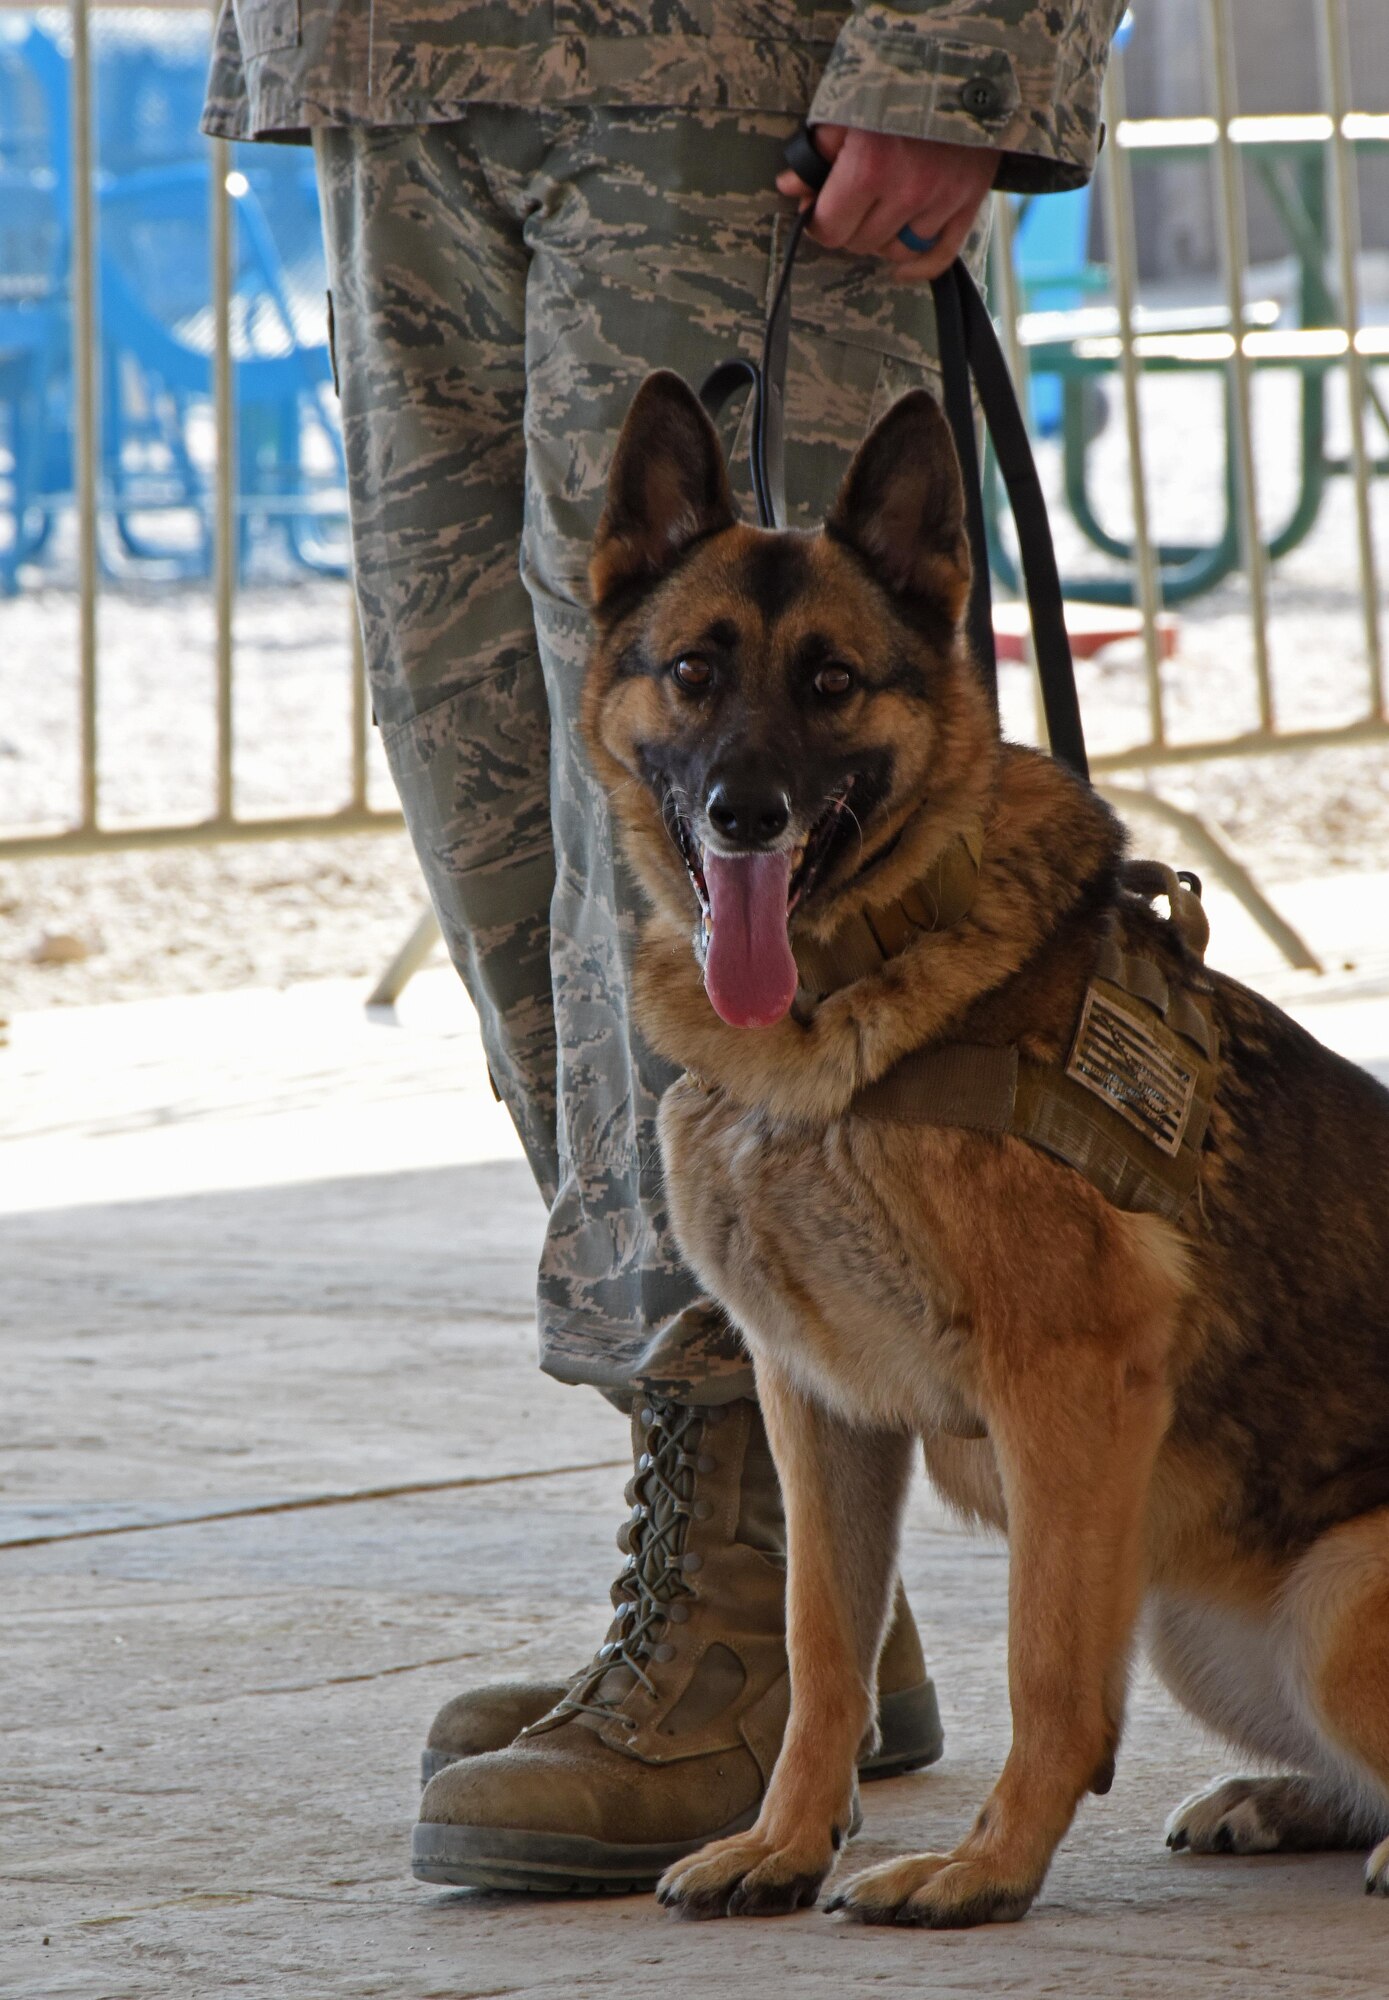 Satie, a U.S. Air Force military working dog, sits after being instructed to by U.S. Air Force Tech. Sgt. Kevin Davis, a dog handler with the 379th Expeditionary Security Forces Squadron MWD section, during a Veterans Day MWD demonstration at Al Udeid Air Base, Qatar, Nov. 11, 2016. Satie is a 5-year-old, German shepherd stationed at Shaw Air Force Base, SC. (U.S. Air Force photo by Senior Airman Cynthia A. Innocenti)